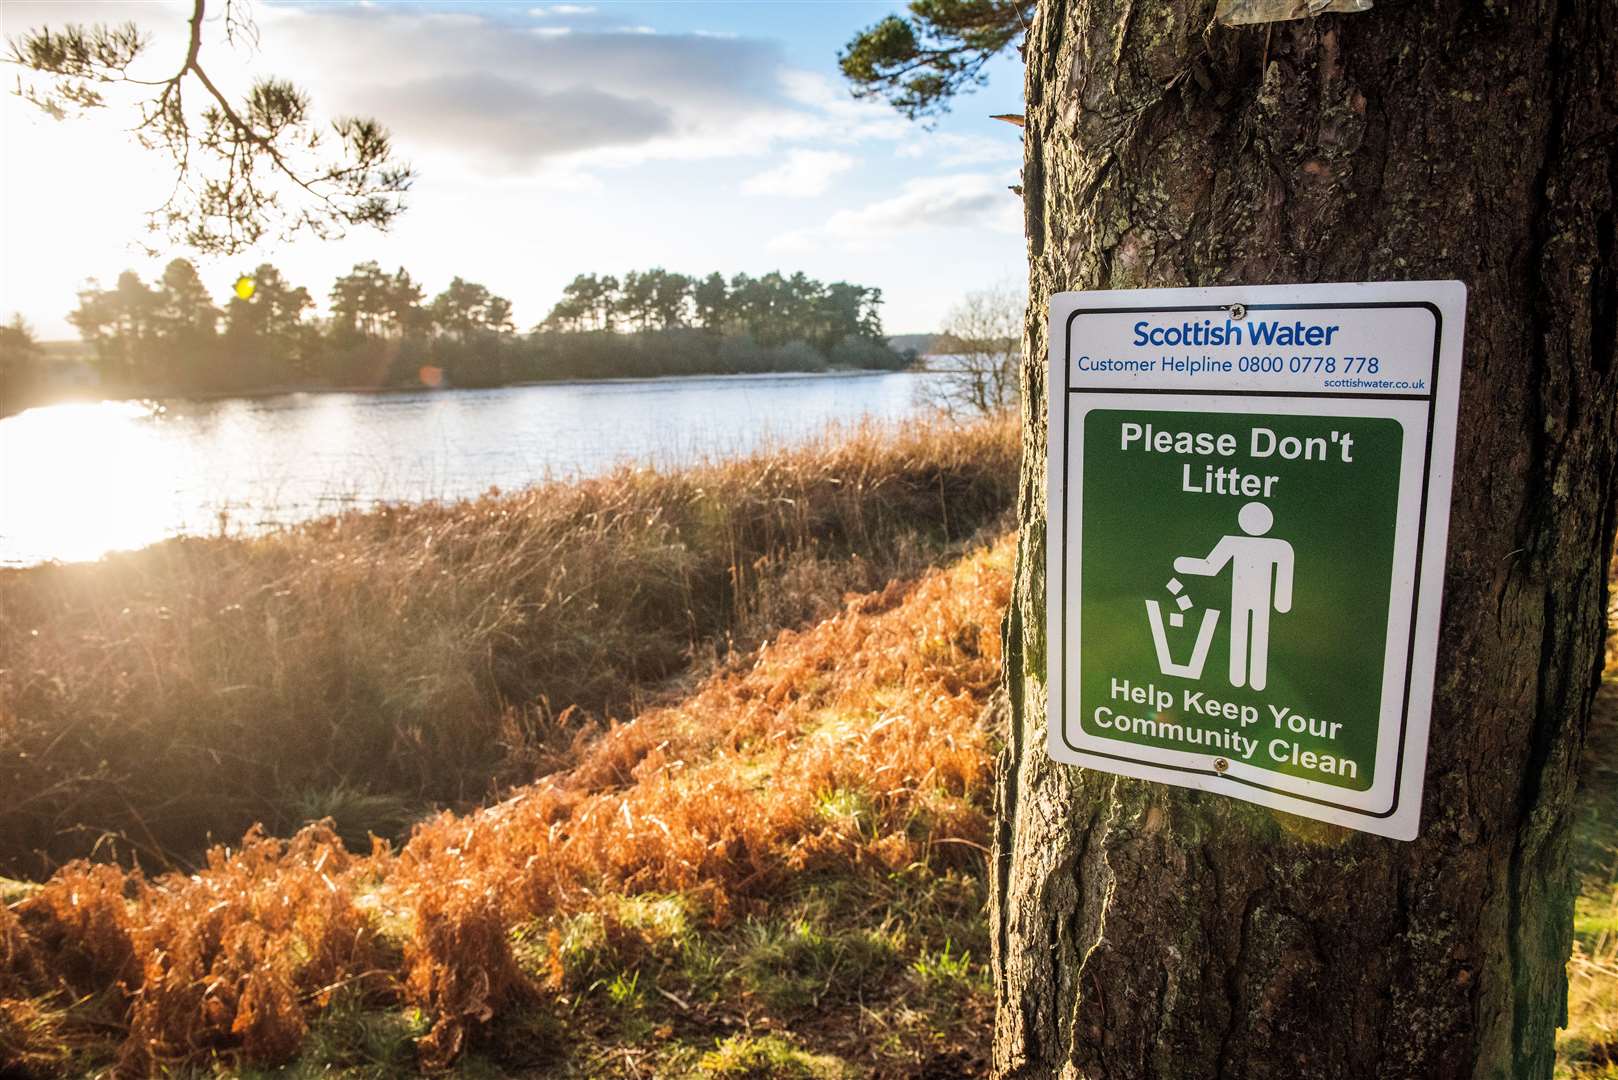 Anti-social behaviour has been an issue in recent years at reservoirs. Picture: Chris Watt